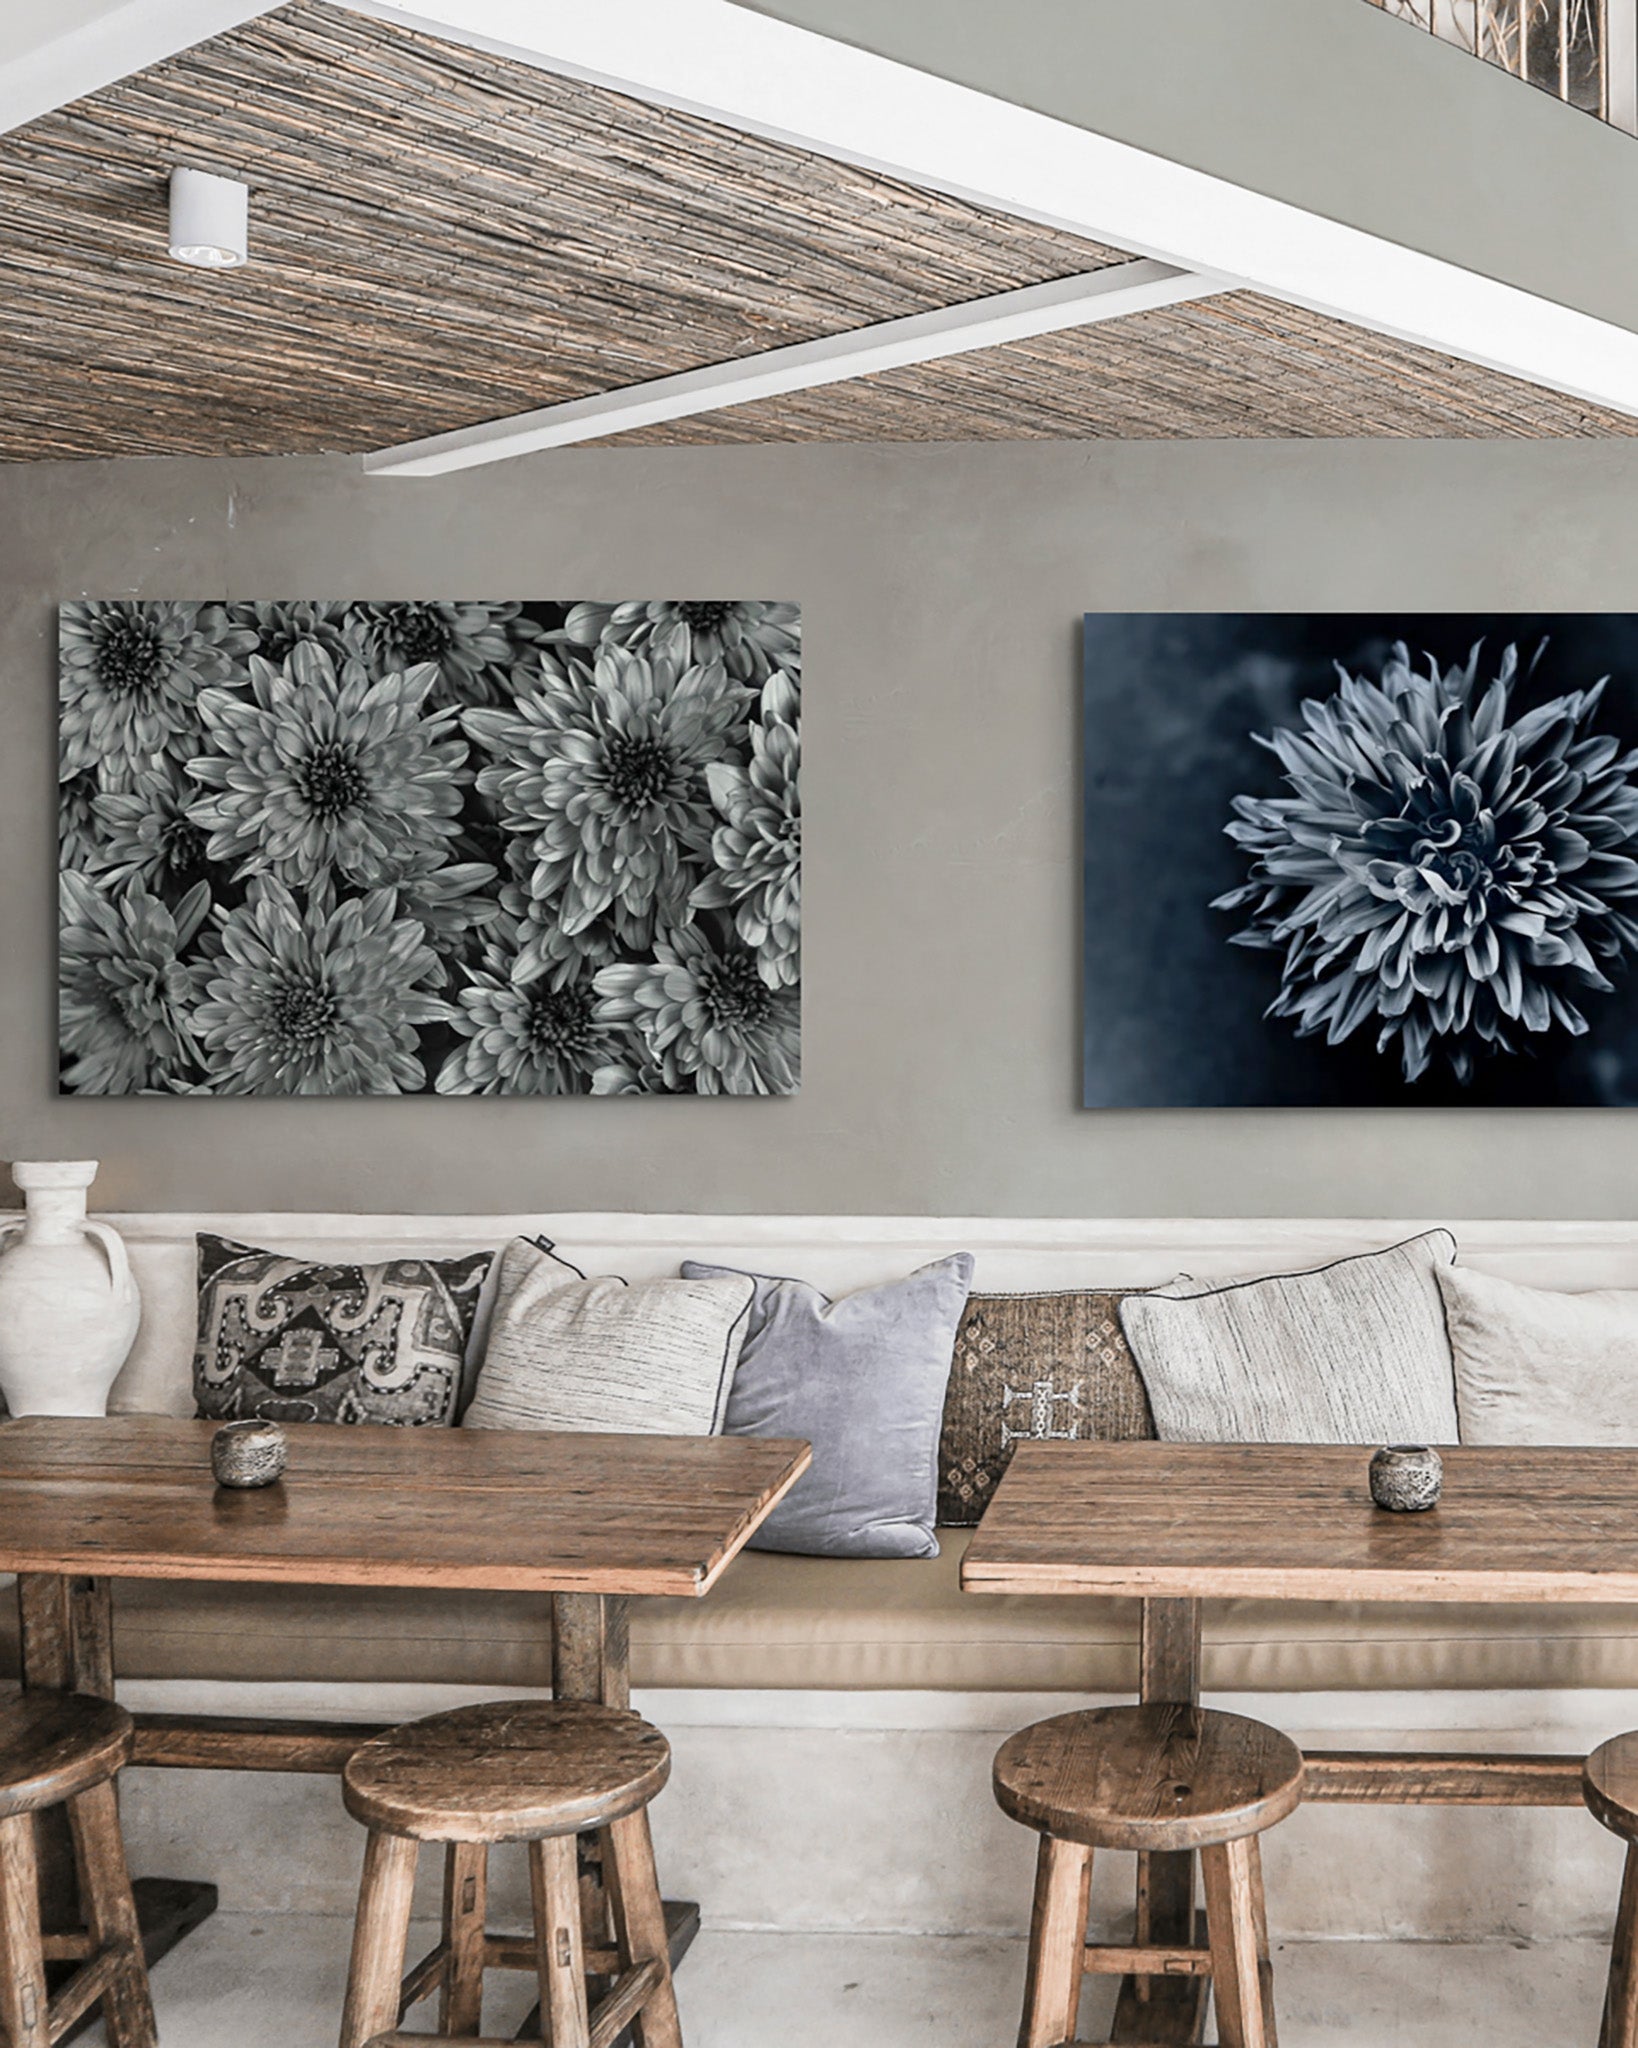 Flower photography hanging on the wall of a restaurant.  The Photograph is Black Dahlia by Cameron Dreaux Titled "Black Dahlia No. 1." The photograph is a black and white flower photo of a Dahlia flower. There is a second photograph also hanging on the wall. It is a black and white photo of mum's by Dreaux Fine Art. 